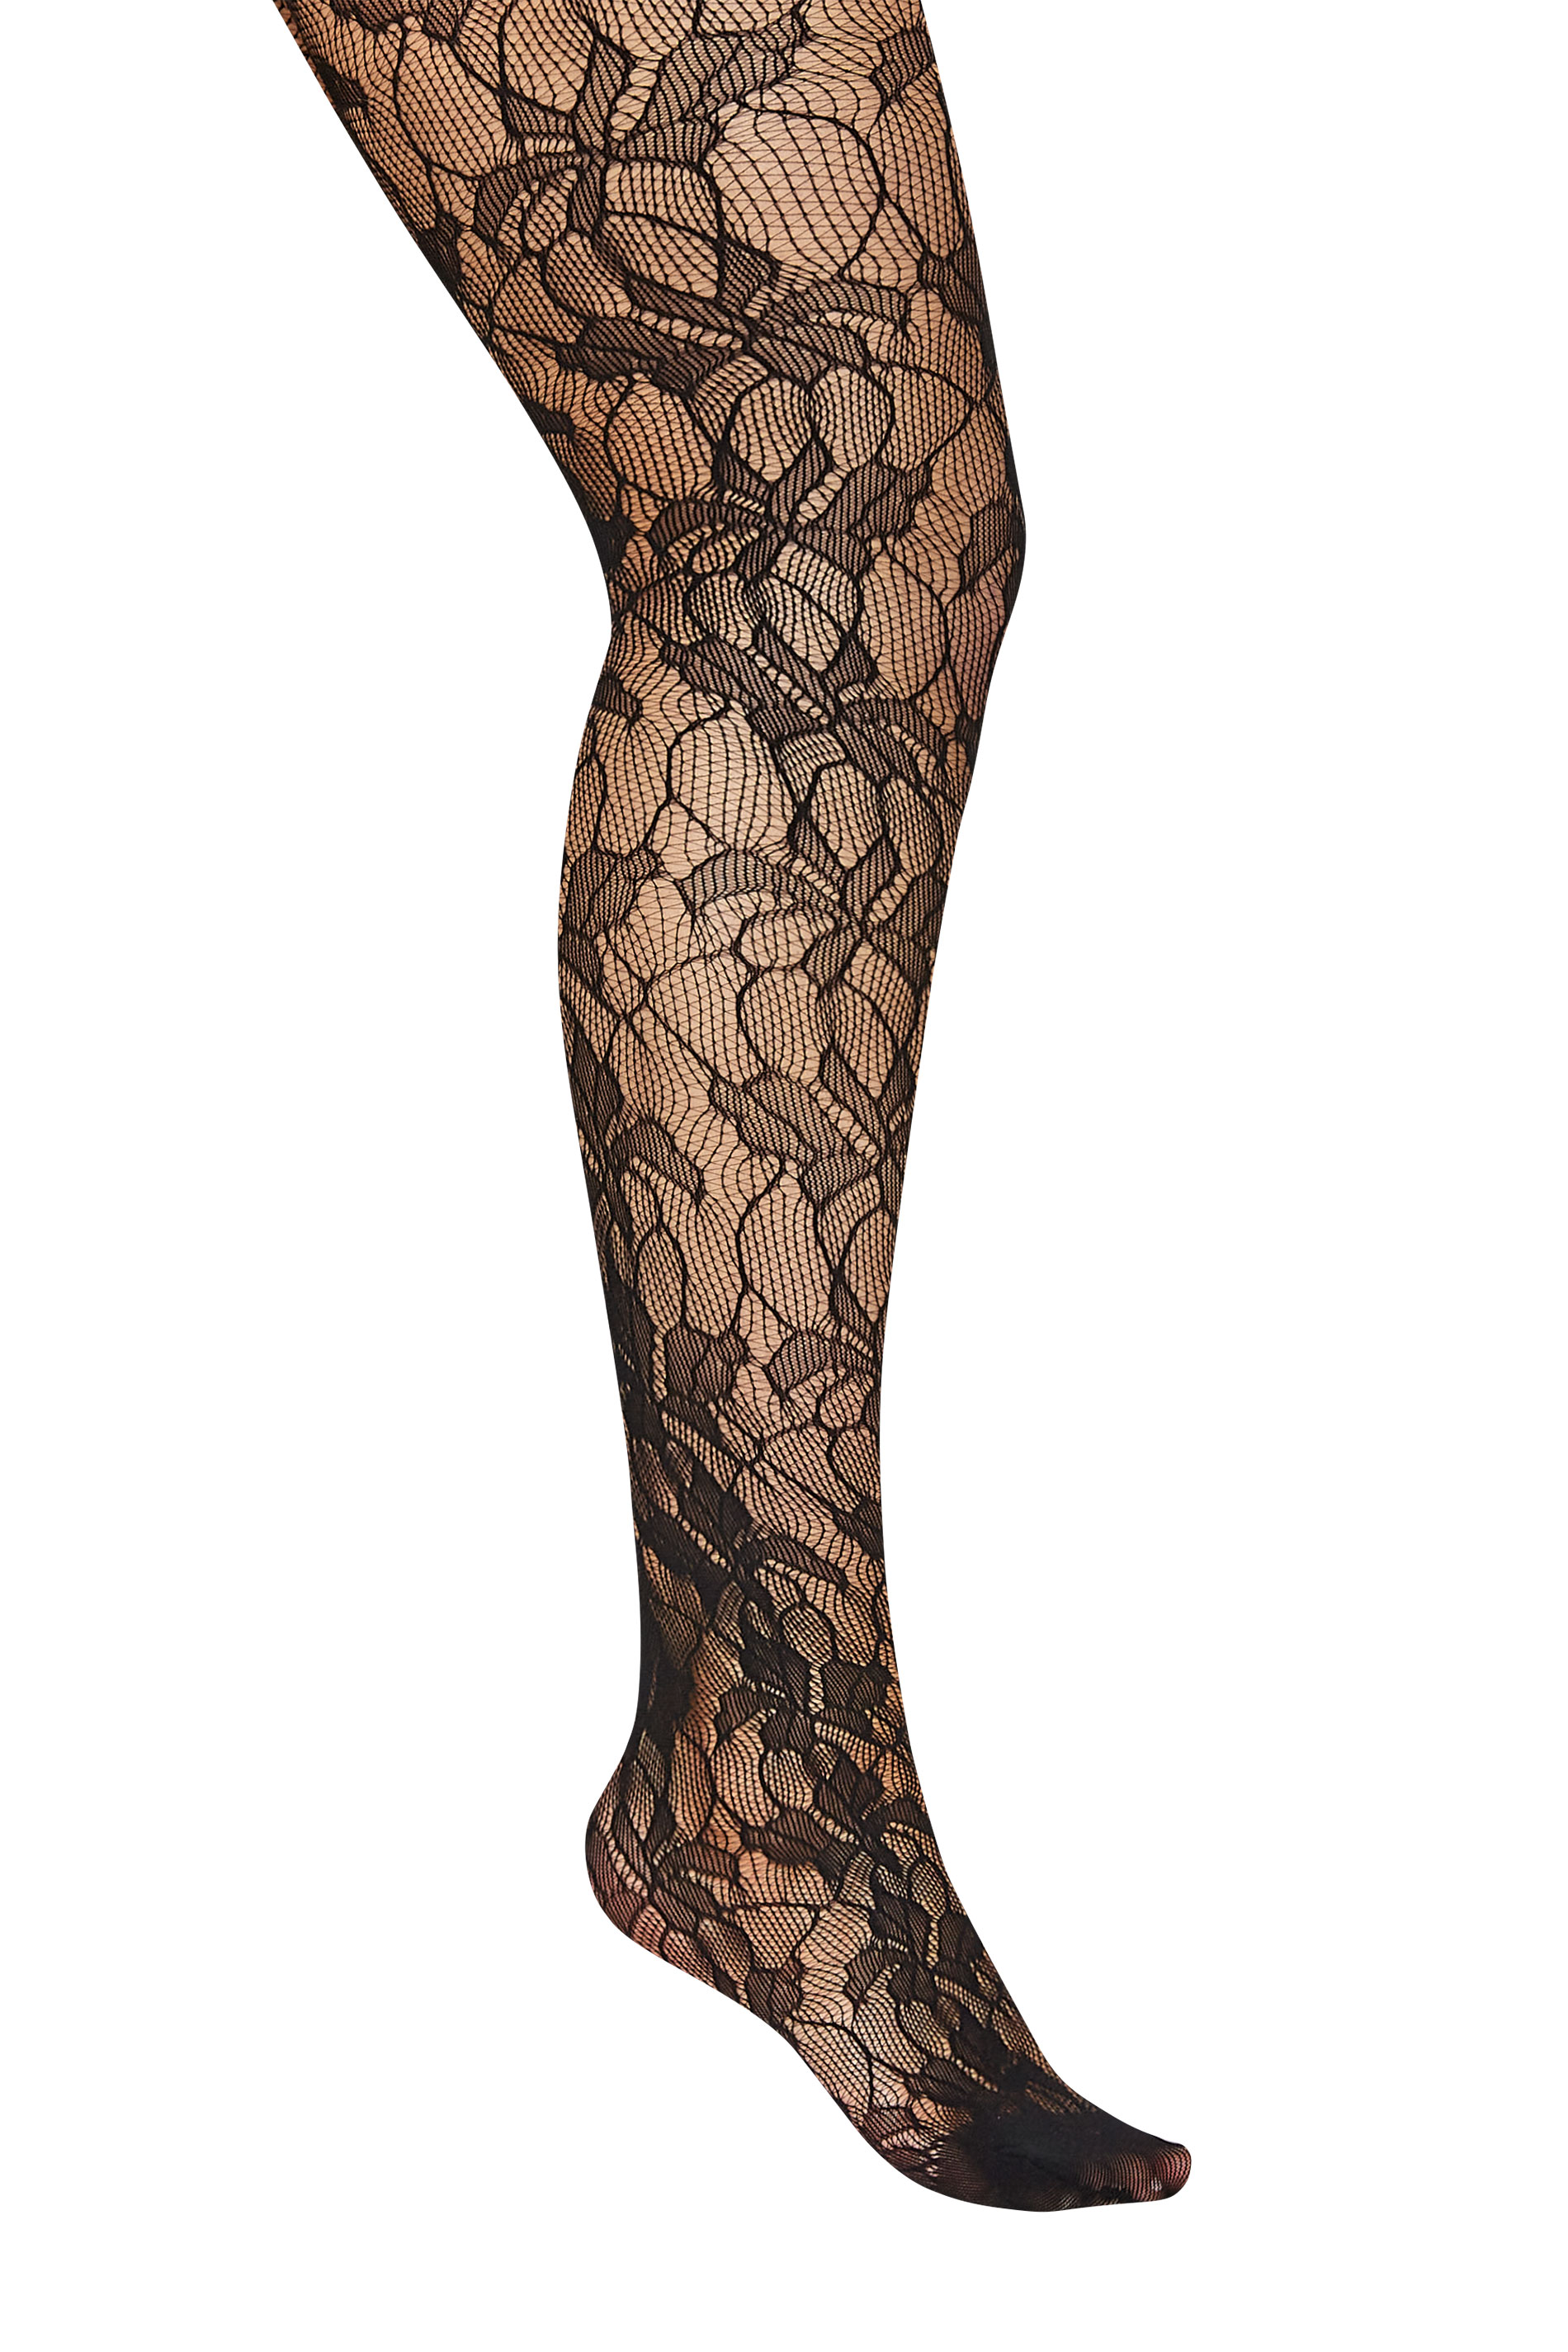 Black Floral Tights | Yours Clothing